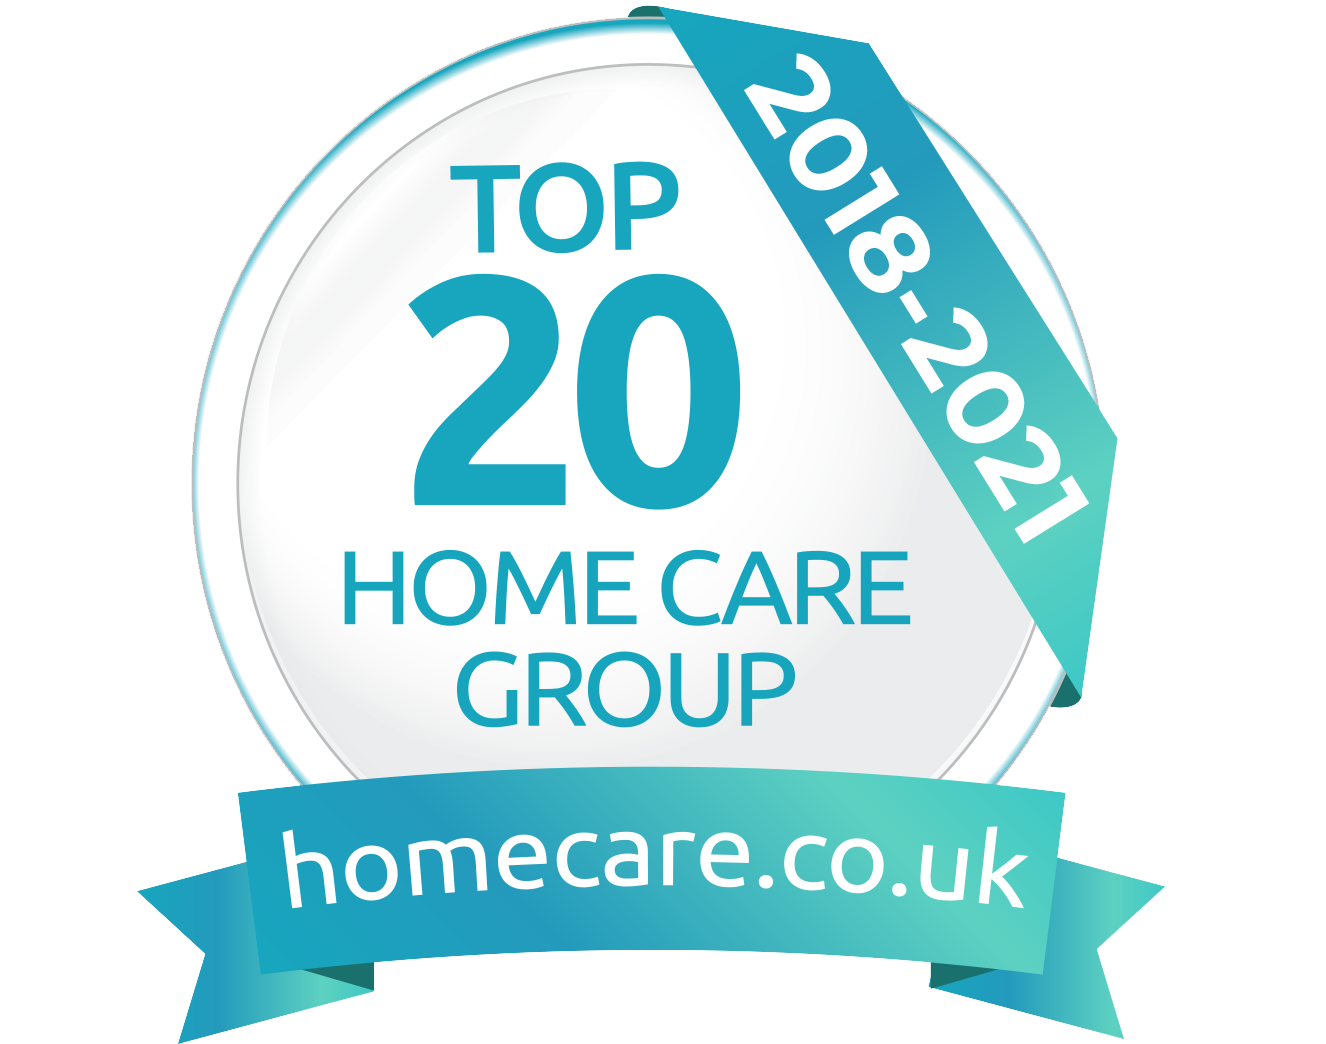 Radfield wins its third Top 20 Home Care Group award